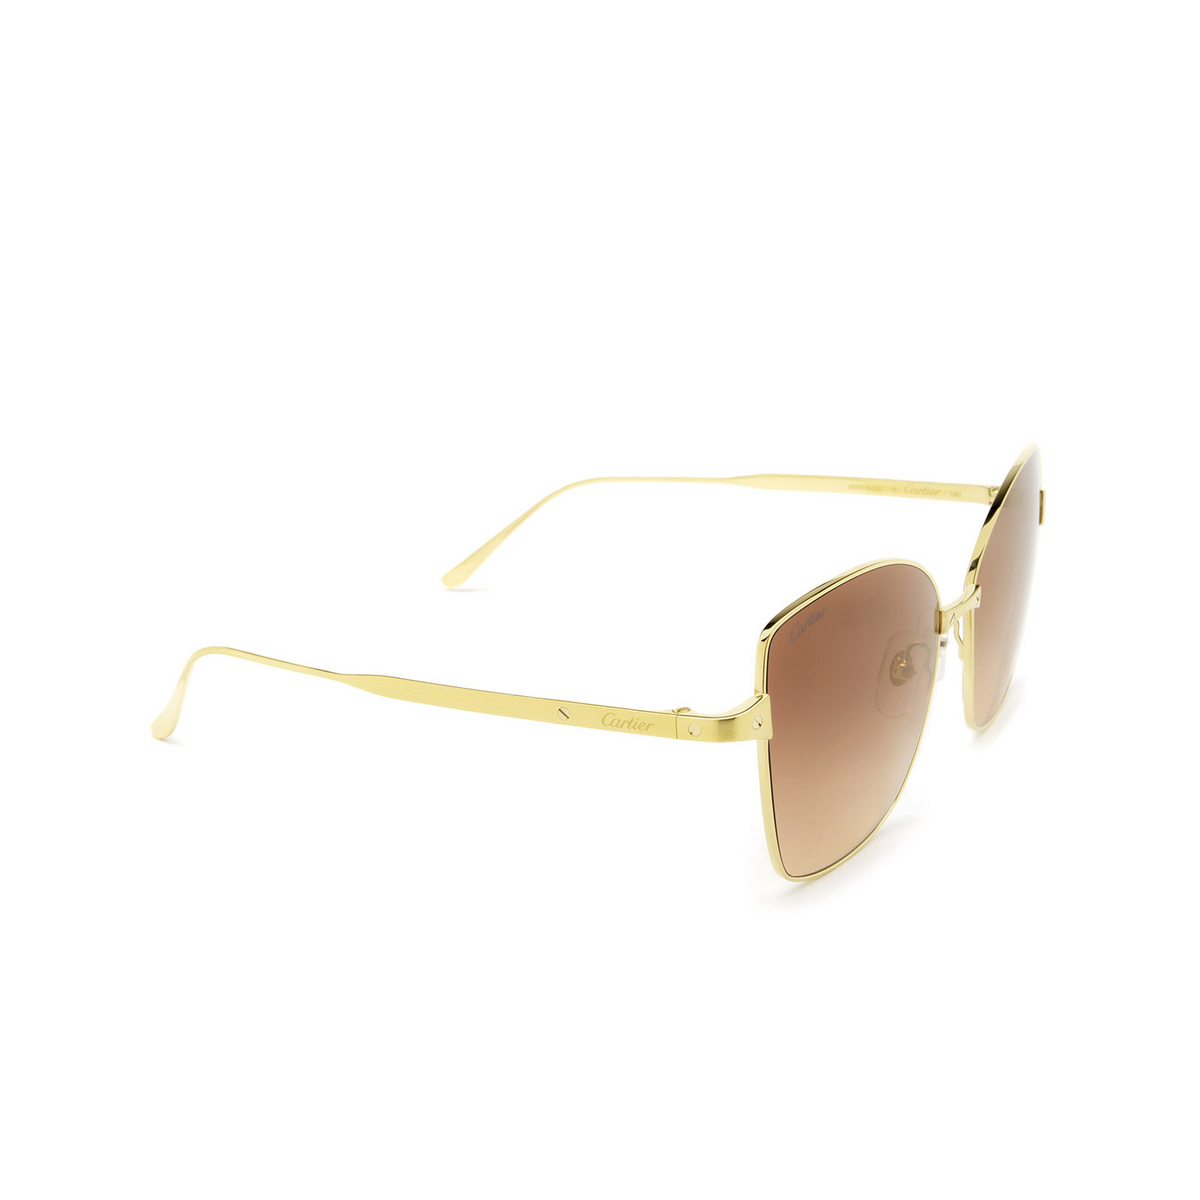 Cartier® Cat-eye Sunglasses: CT0328S color Gold 003 - three-quarters view.